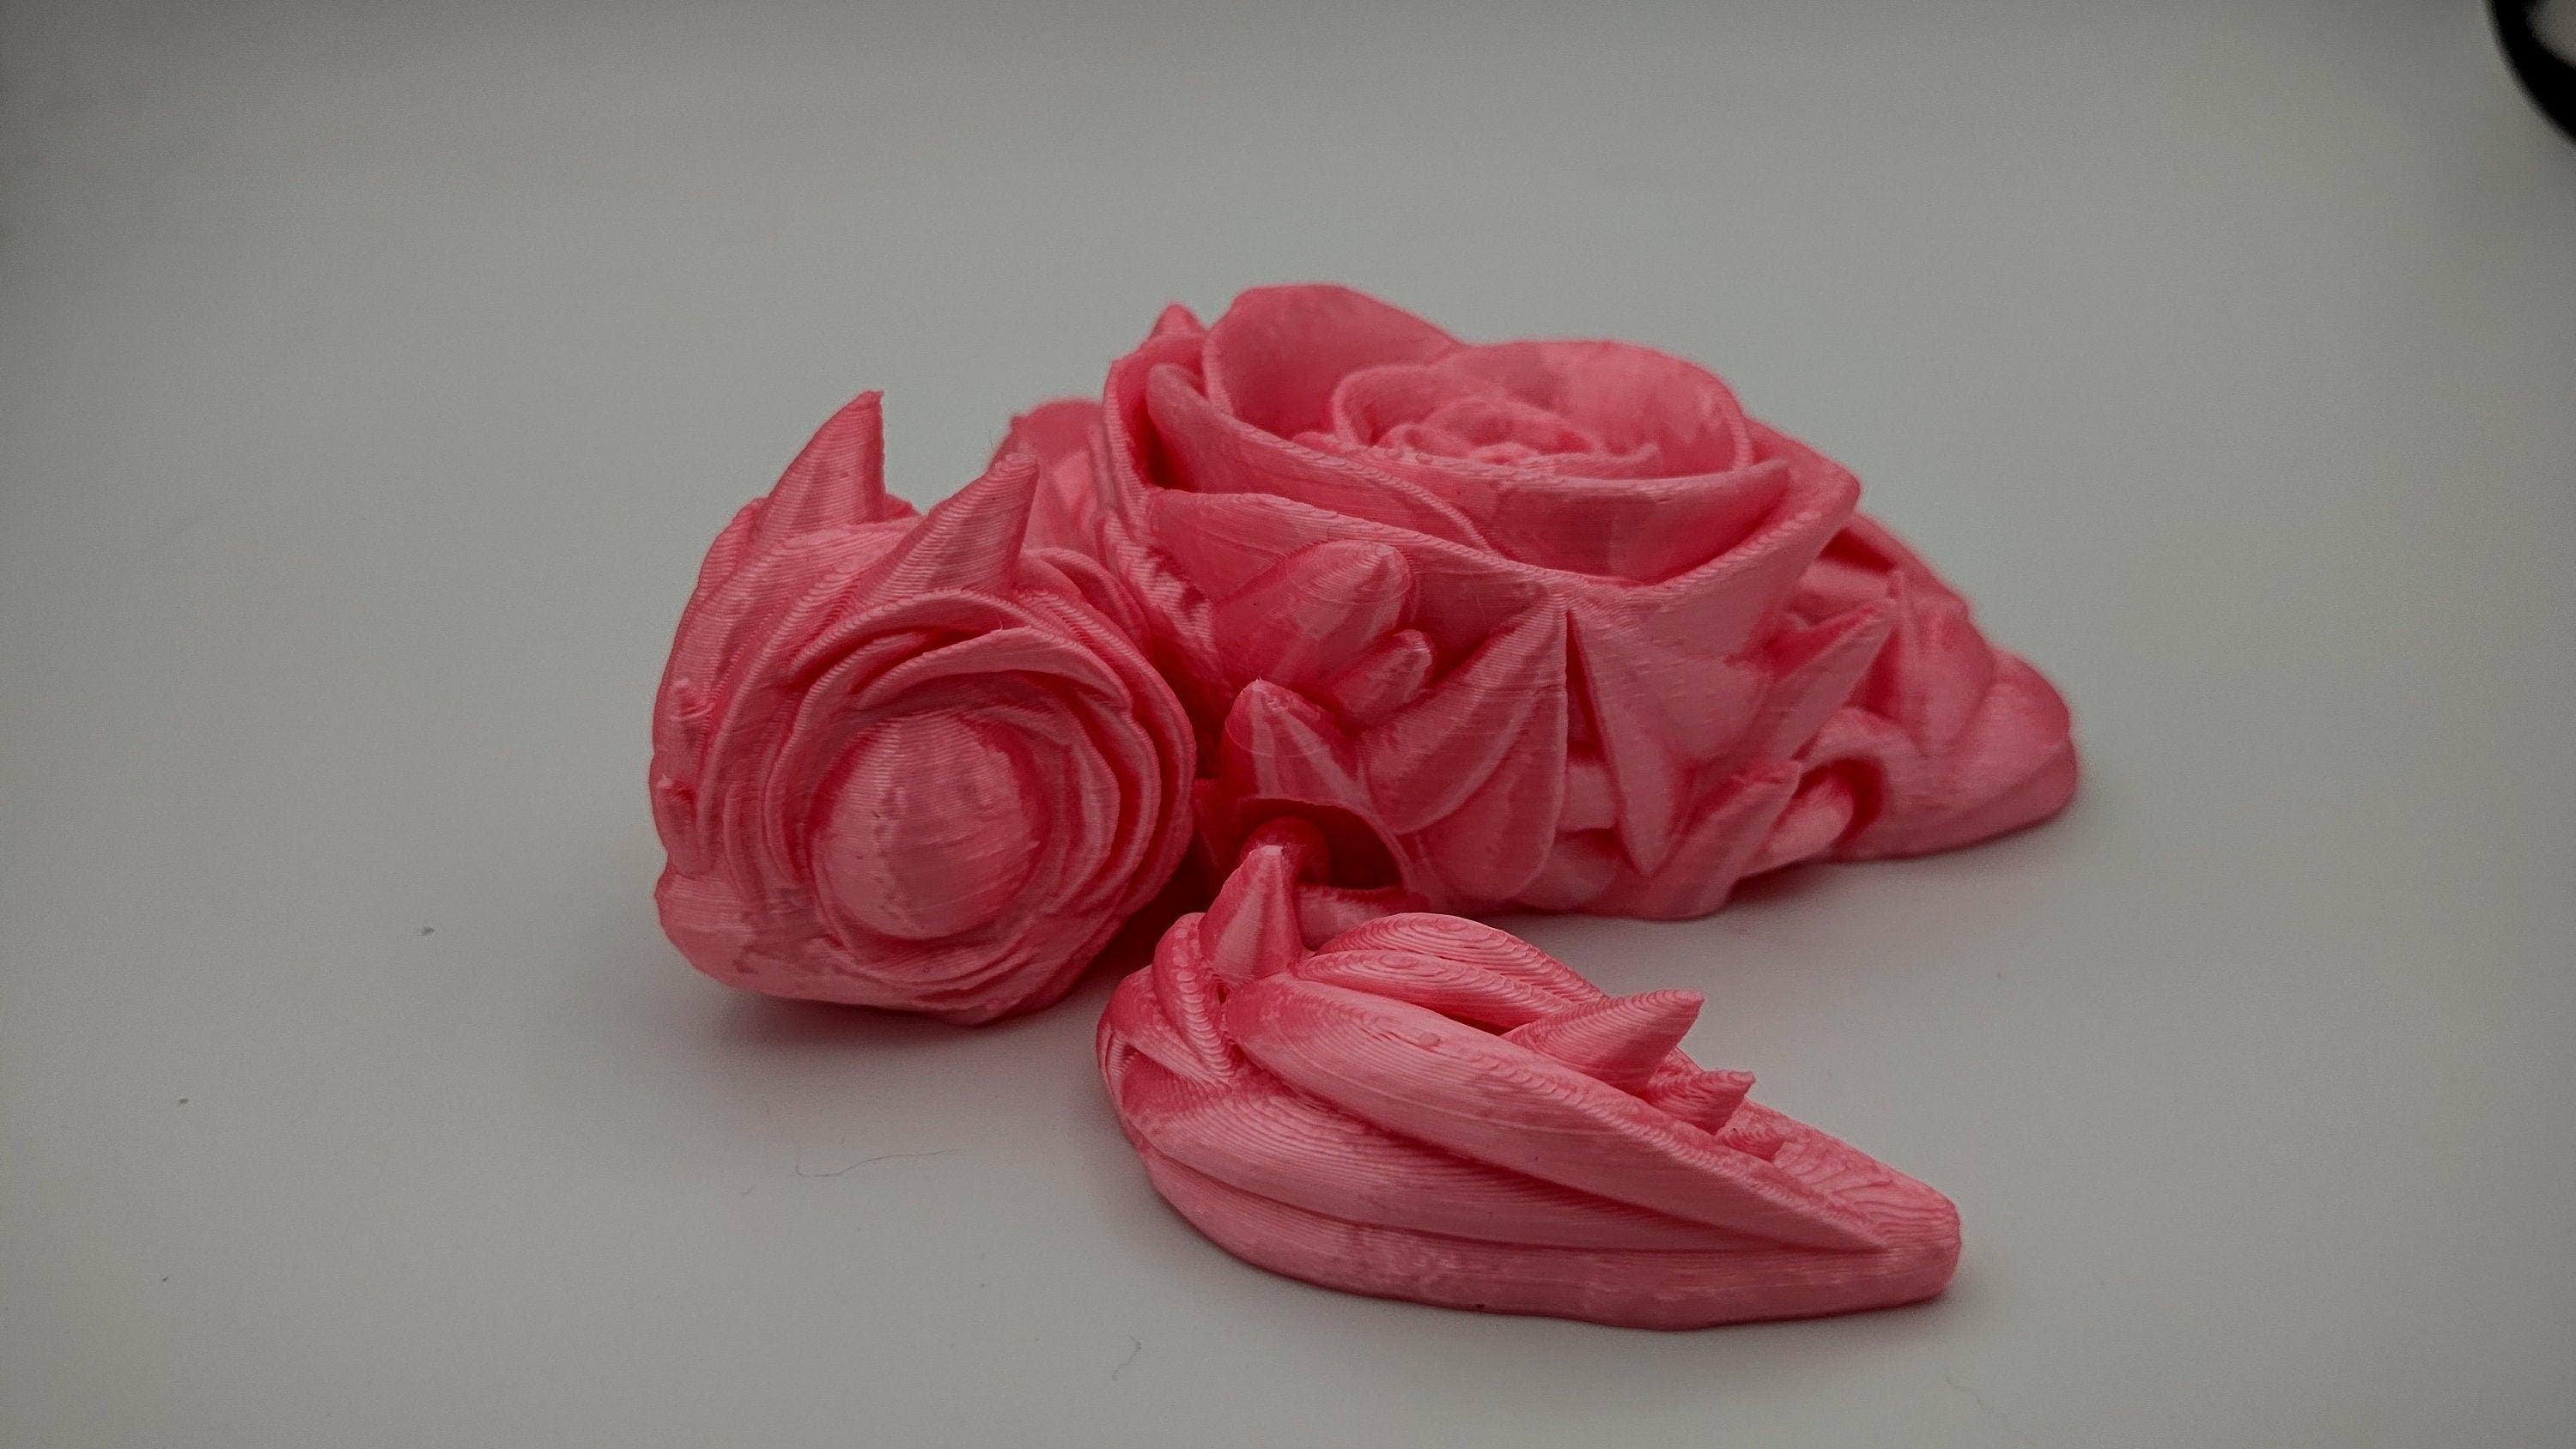 3D printed articulating Rose Turtle Silk Pink. Flexi, Fidget Roseurtle adult toy. 4.5 inch. Adorable Rose turtle buddy. Great gift!